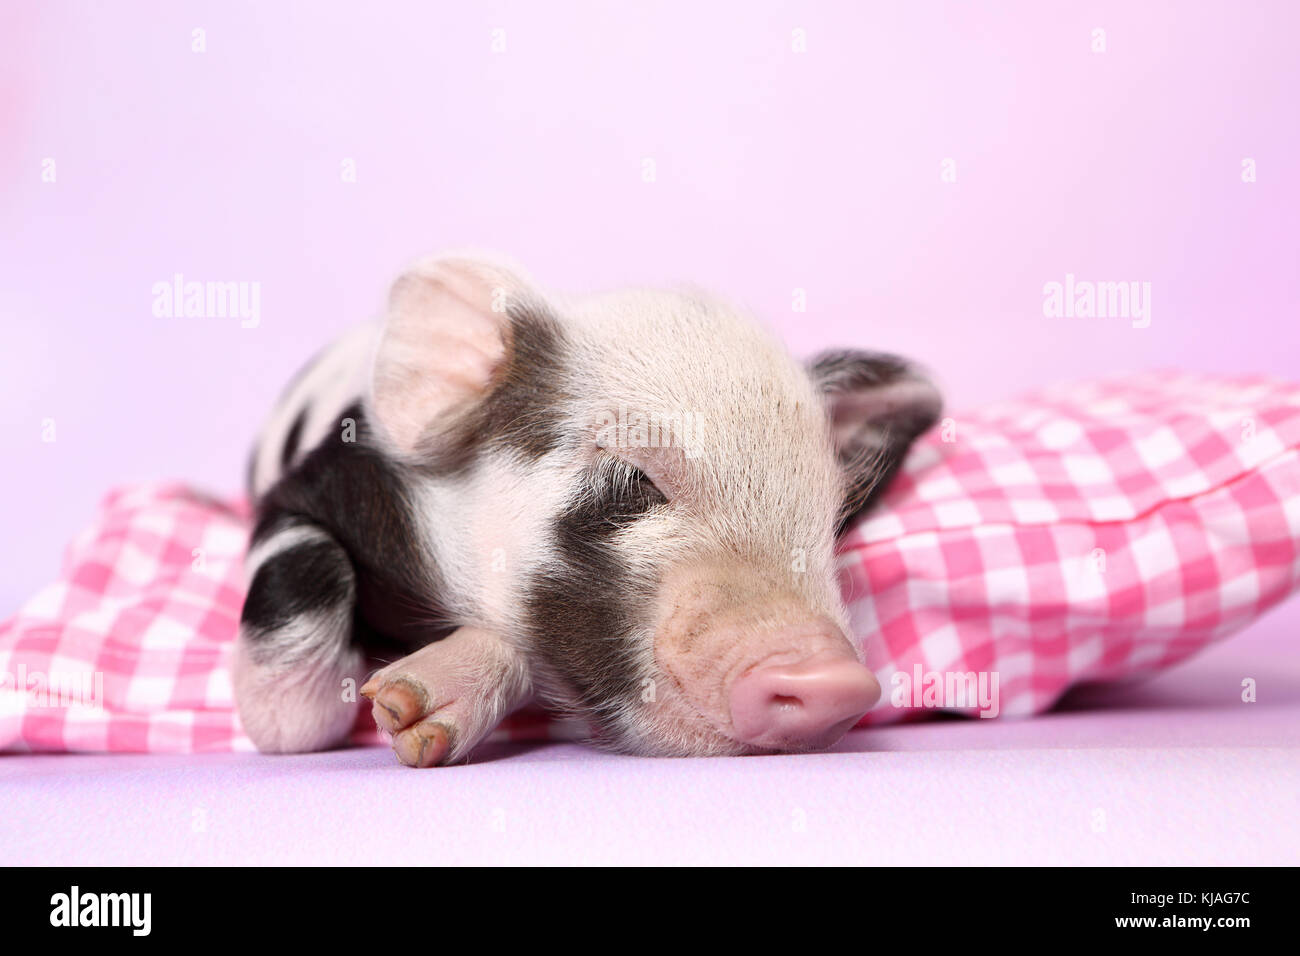 Domestic Pig, Turopolje x ?. Piglet sleeping on pink-checkered pillow. Studio picture seen against a pink background. Germany Stock Photo